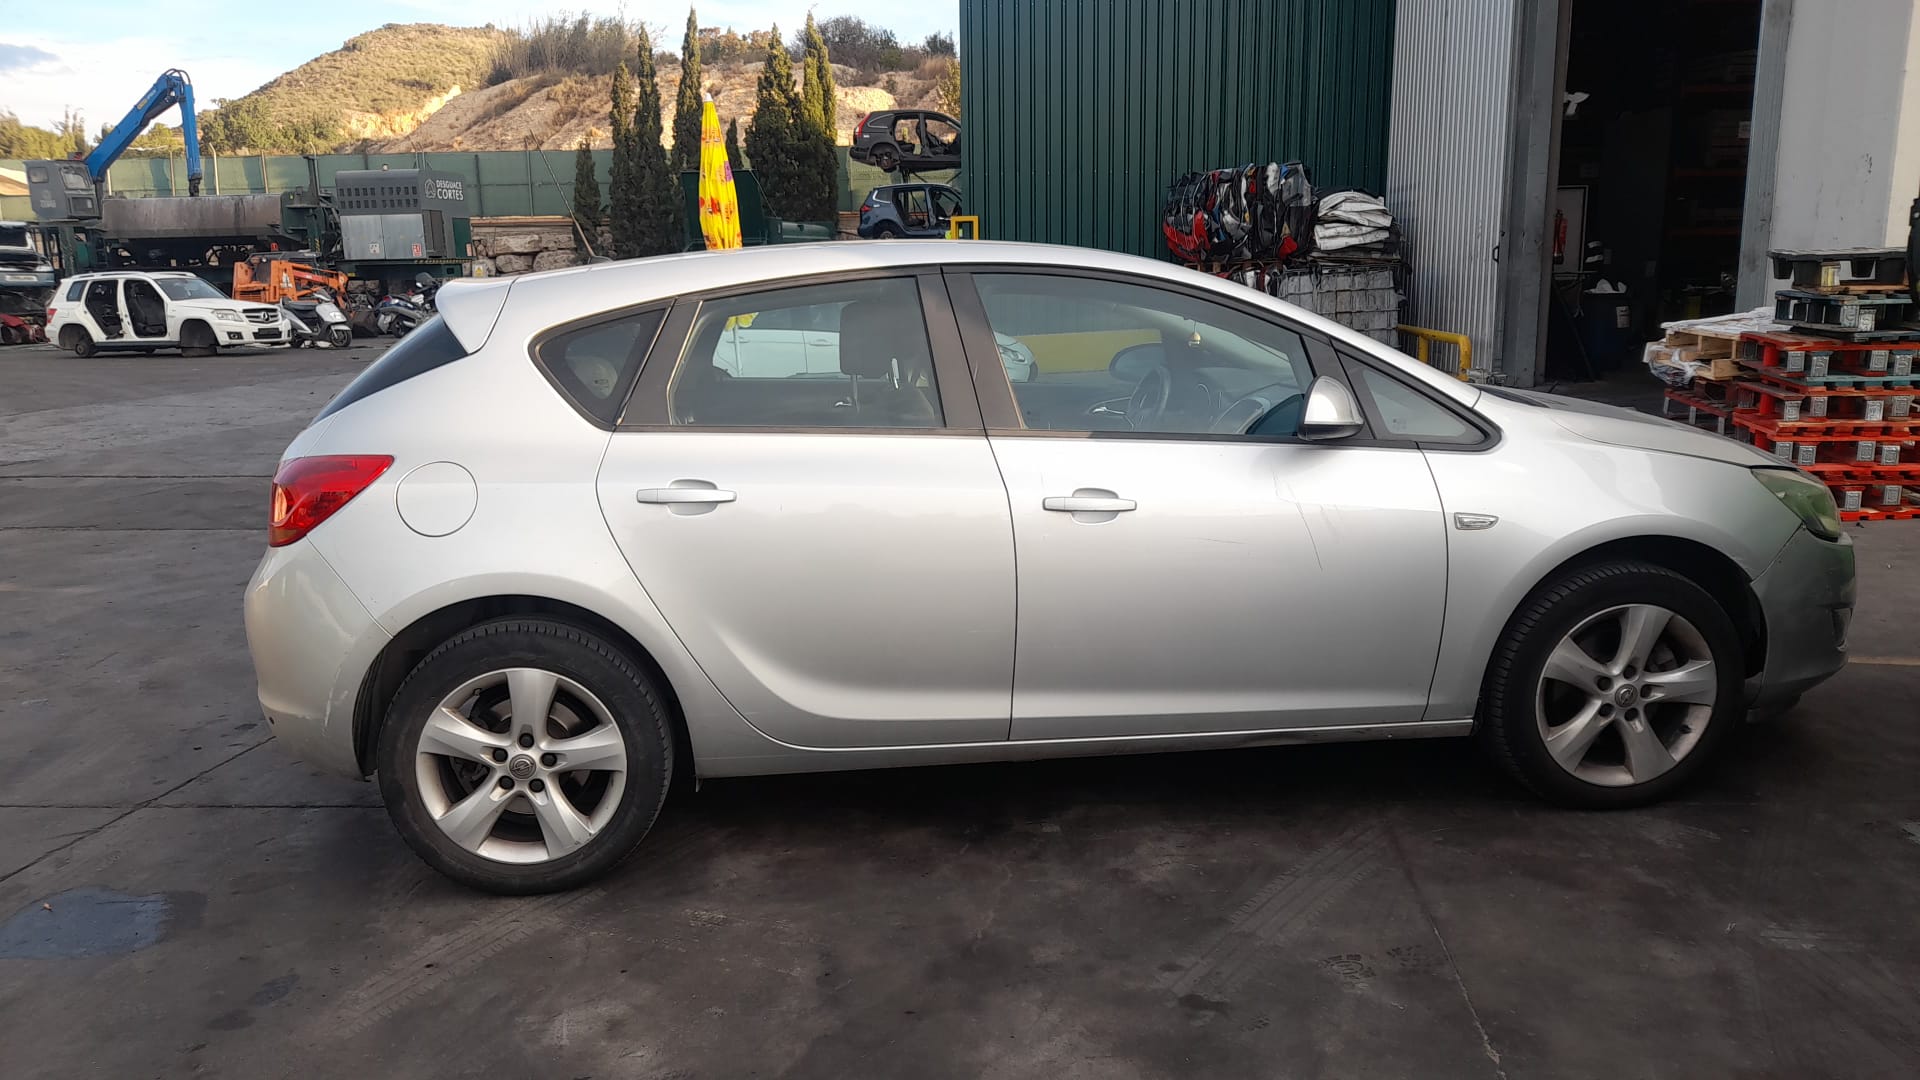 OPEL Astra J (2009-2020) Заден рафт за пакети 2345268, 13292208 20356398